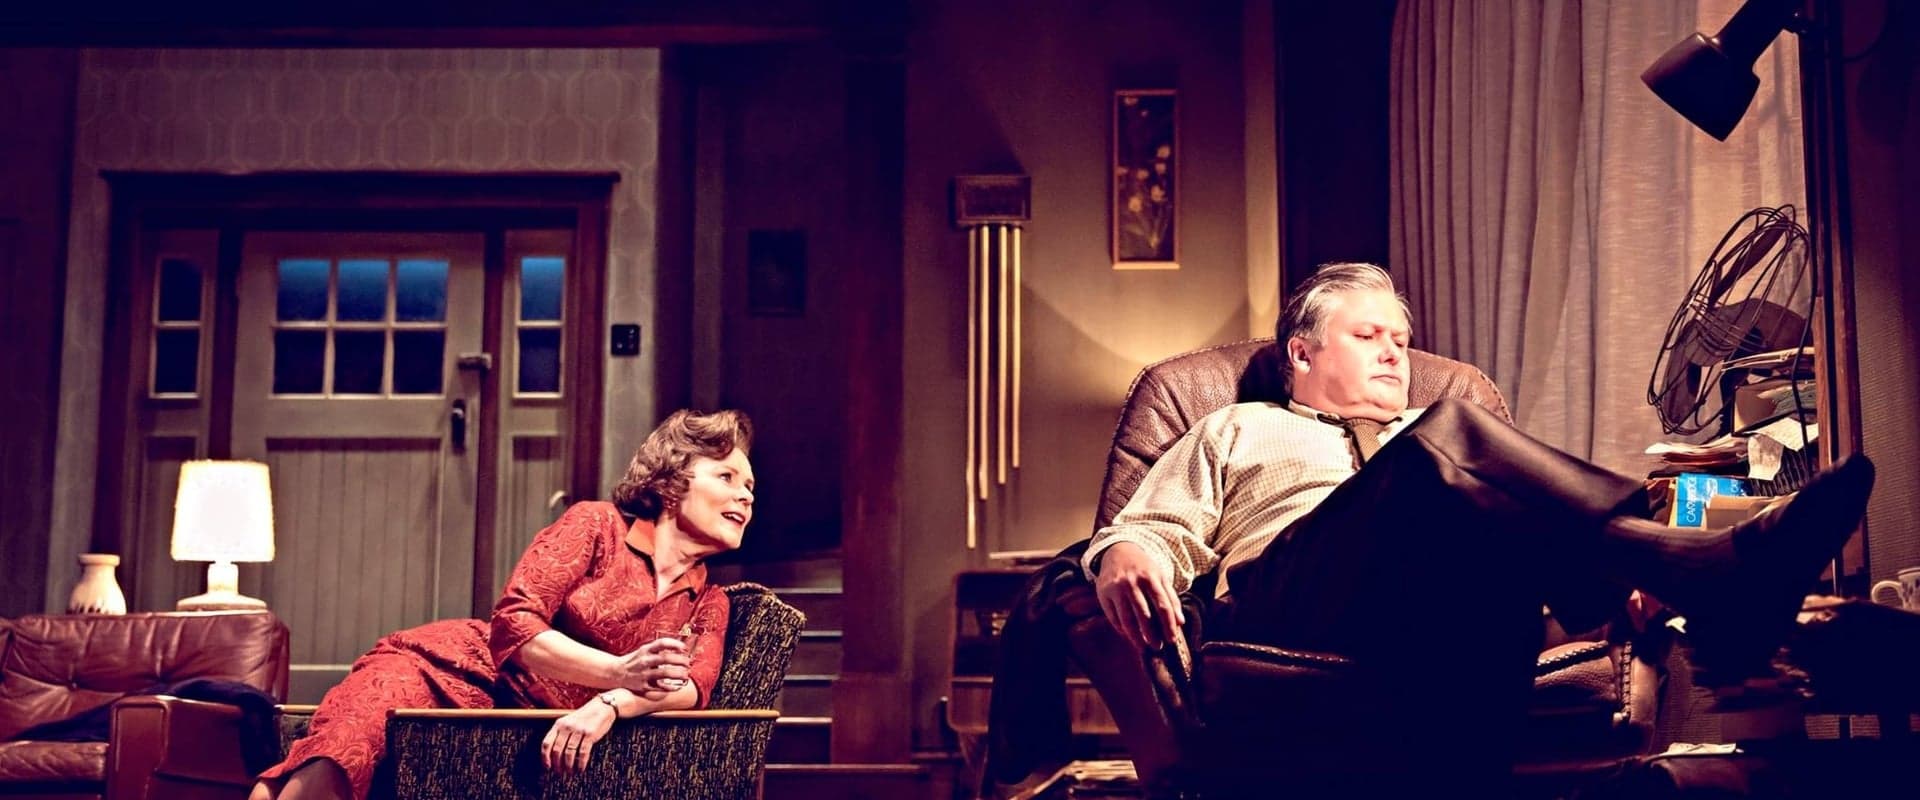 National Theatre Live: Edward Albee's Who's Afraid of Virginia Woolf?